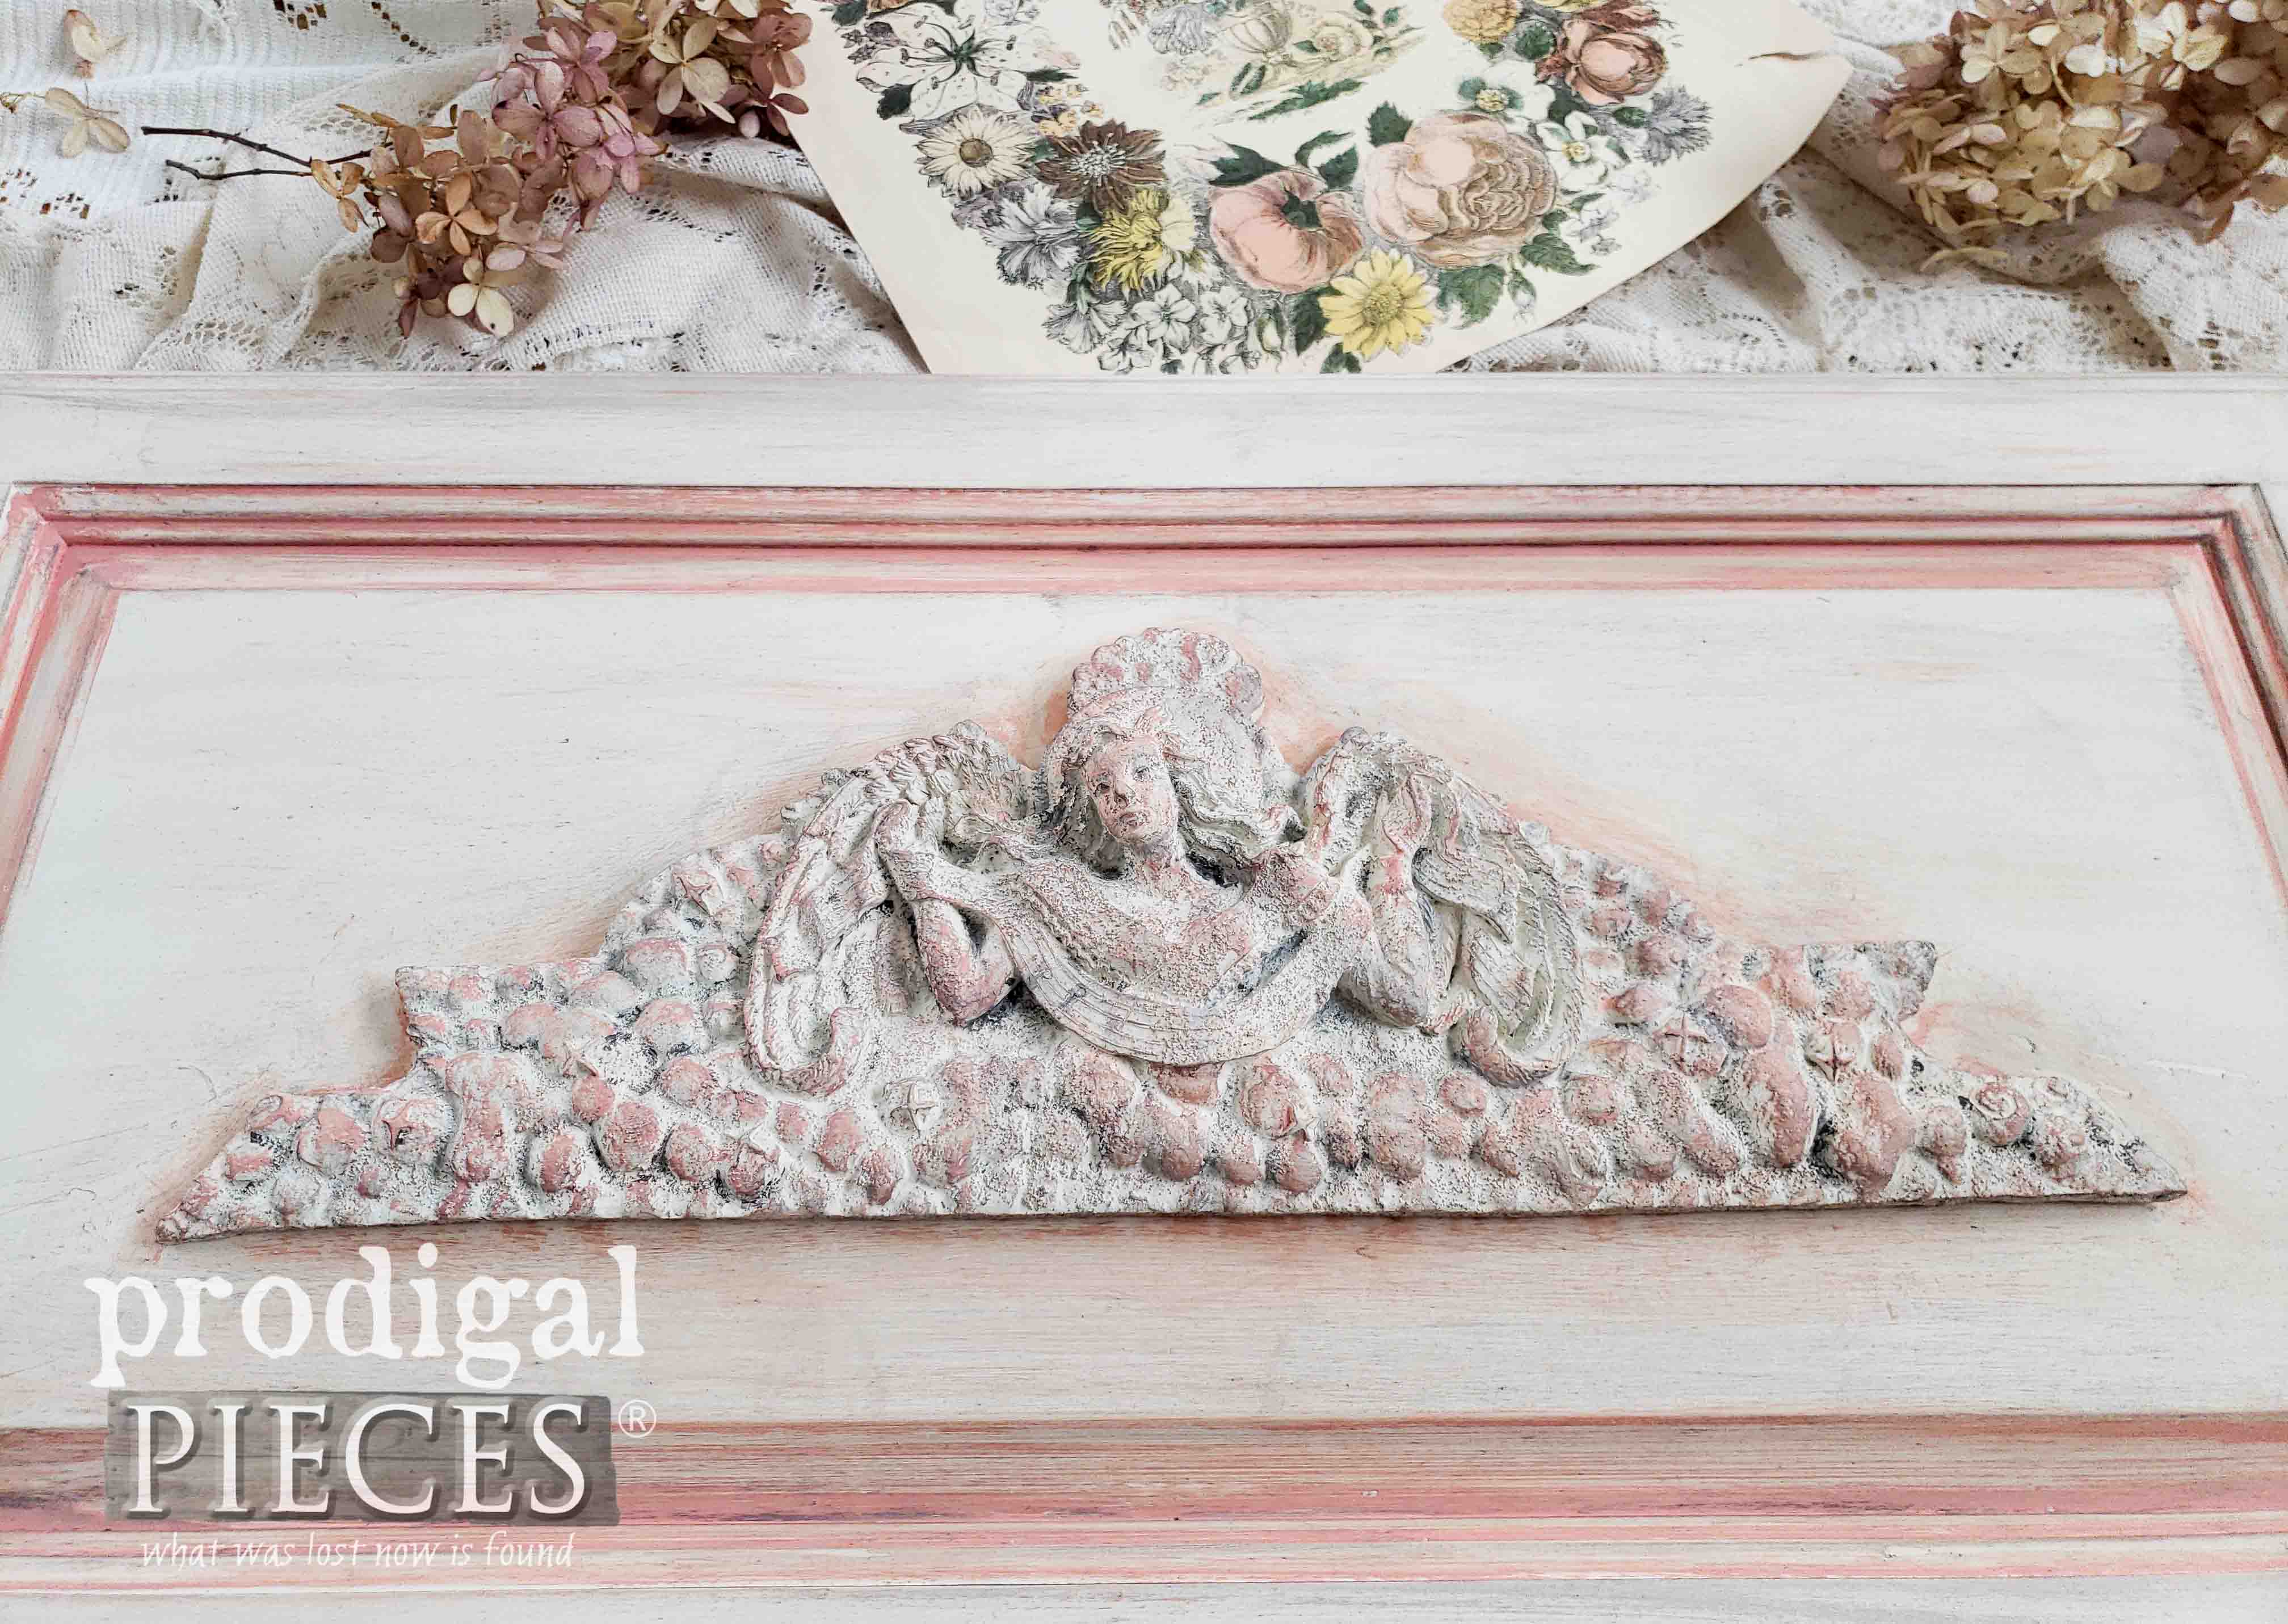 Vintage French Relief Wall Art Created with Upcycled Thrift Store Finds by Larissa of Prodigal Pieces | prodigalpieces.com #prodigalpieces #diy #handmade #home #shopping #homedecor #shabbychic #homedecorideas #videos